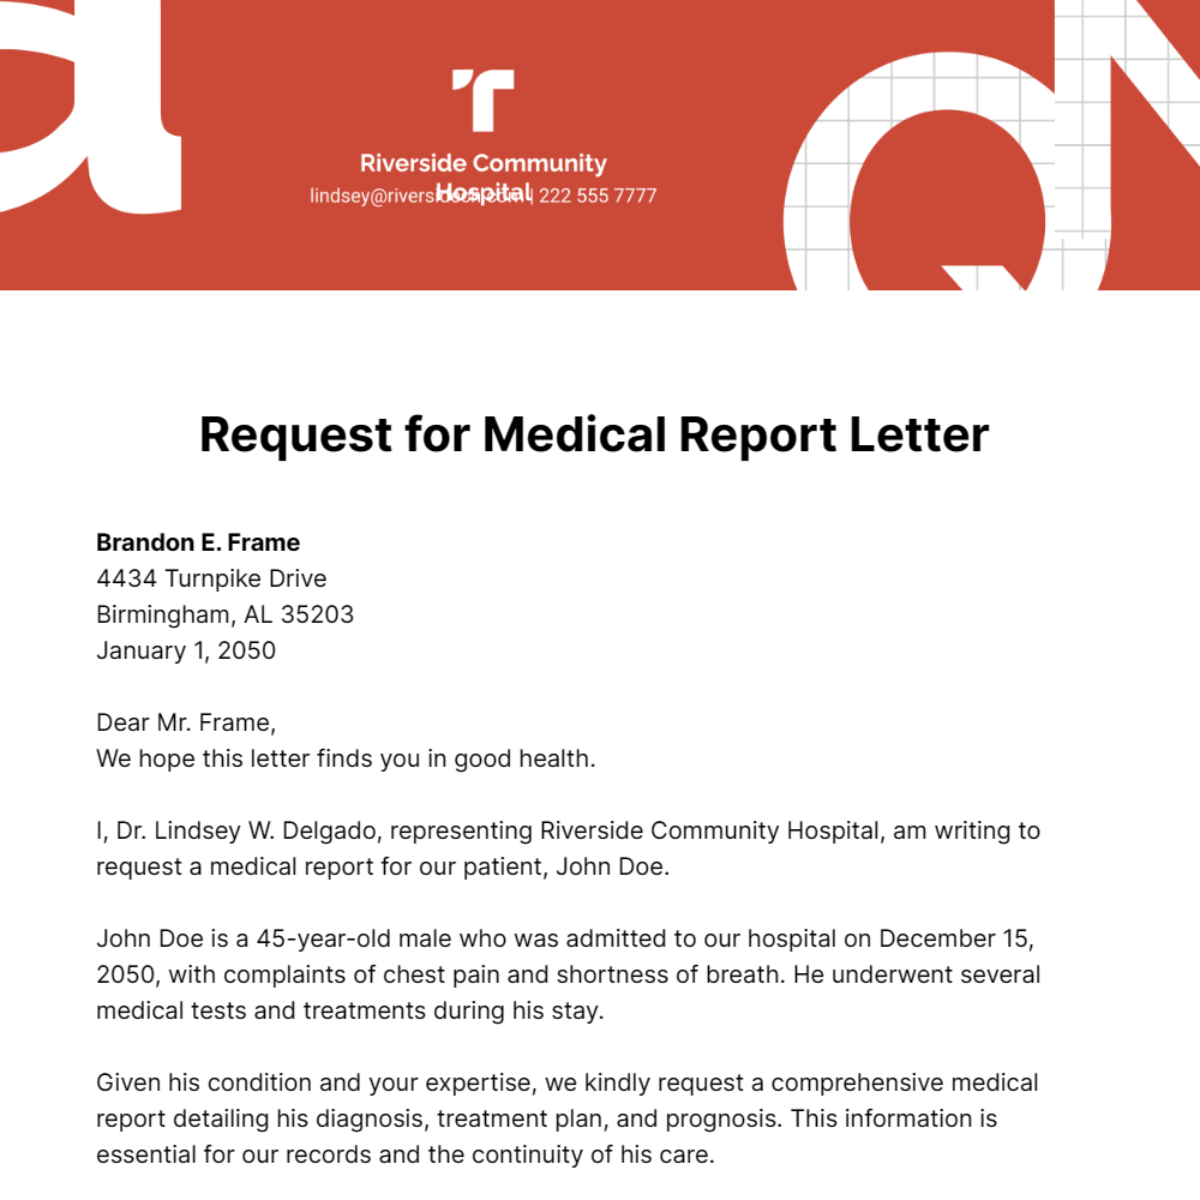 Request for Medical Report Letter Template